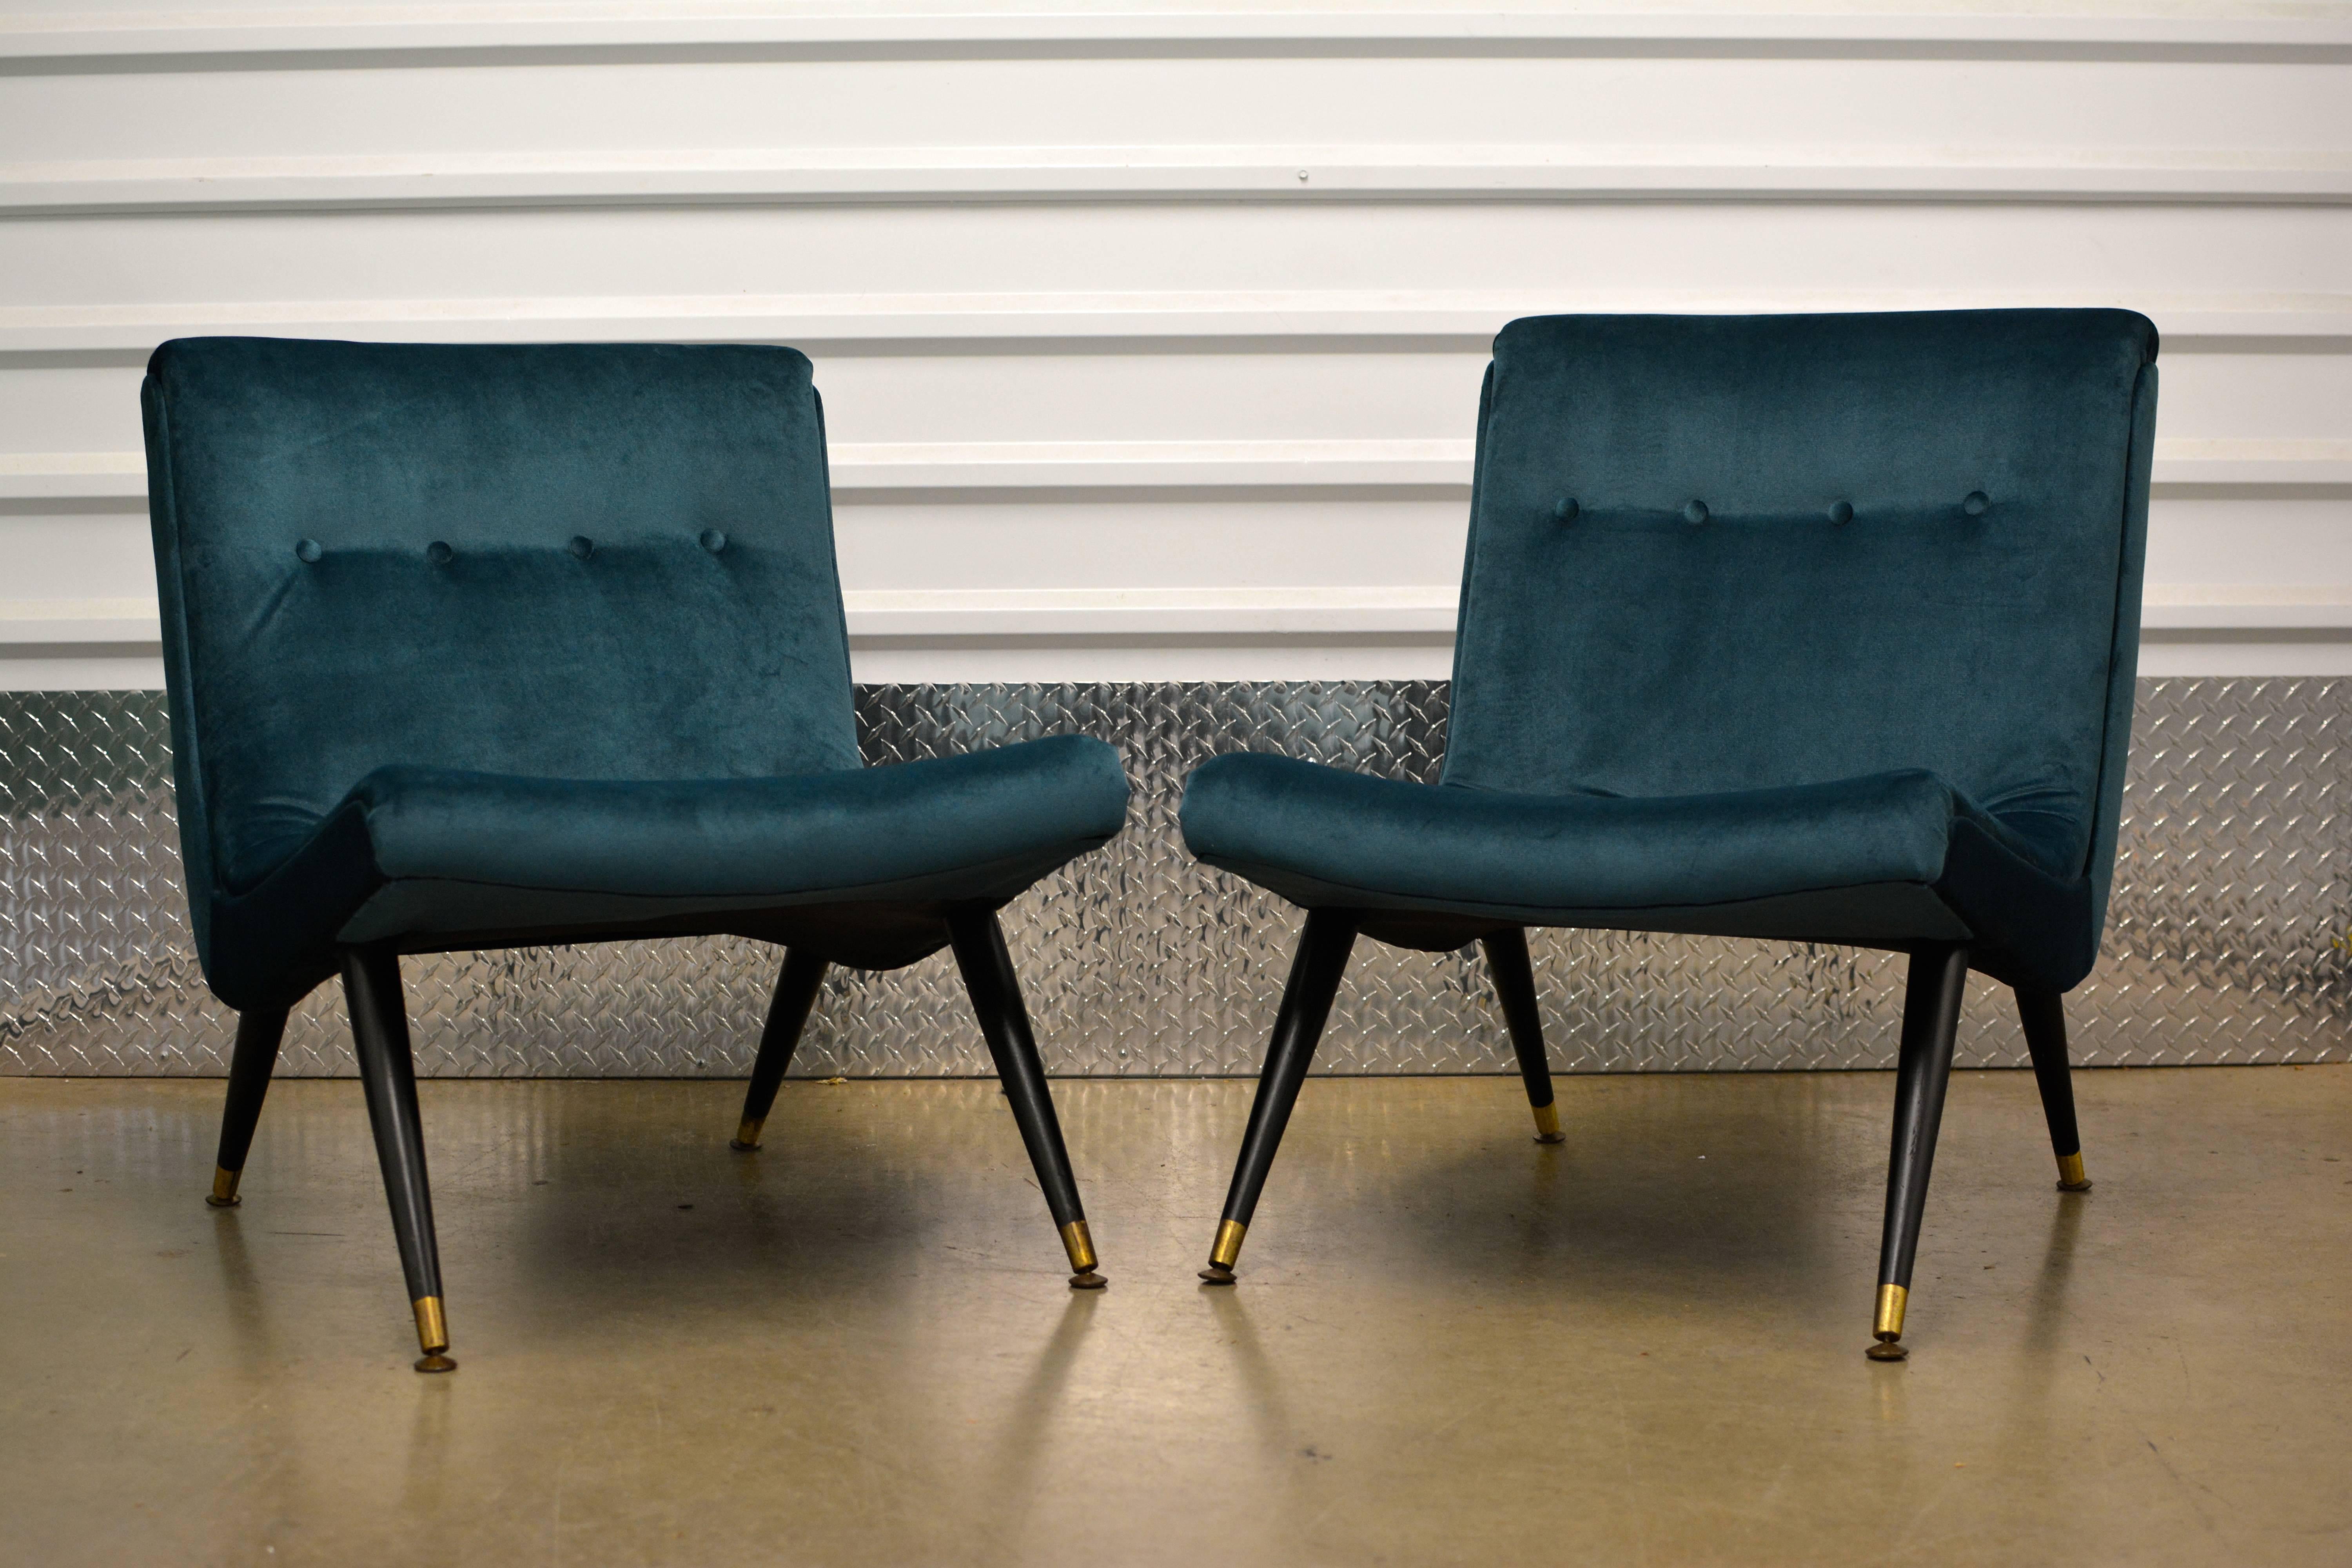 Outstanding pair of scoop lounge chairs attributed to Milo Baughman. Newly reupholstered in a stunning peacock velvet. Lacquered walnut legs with patinaed brass feet. Stunning pair of chairs with fabulous design and detail. 
